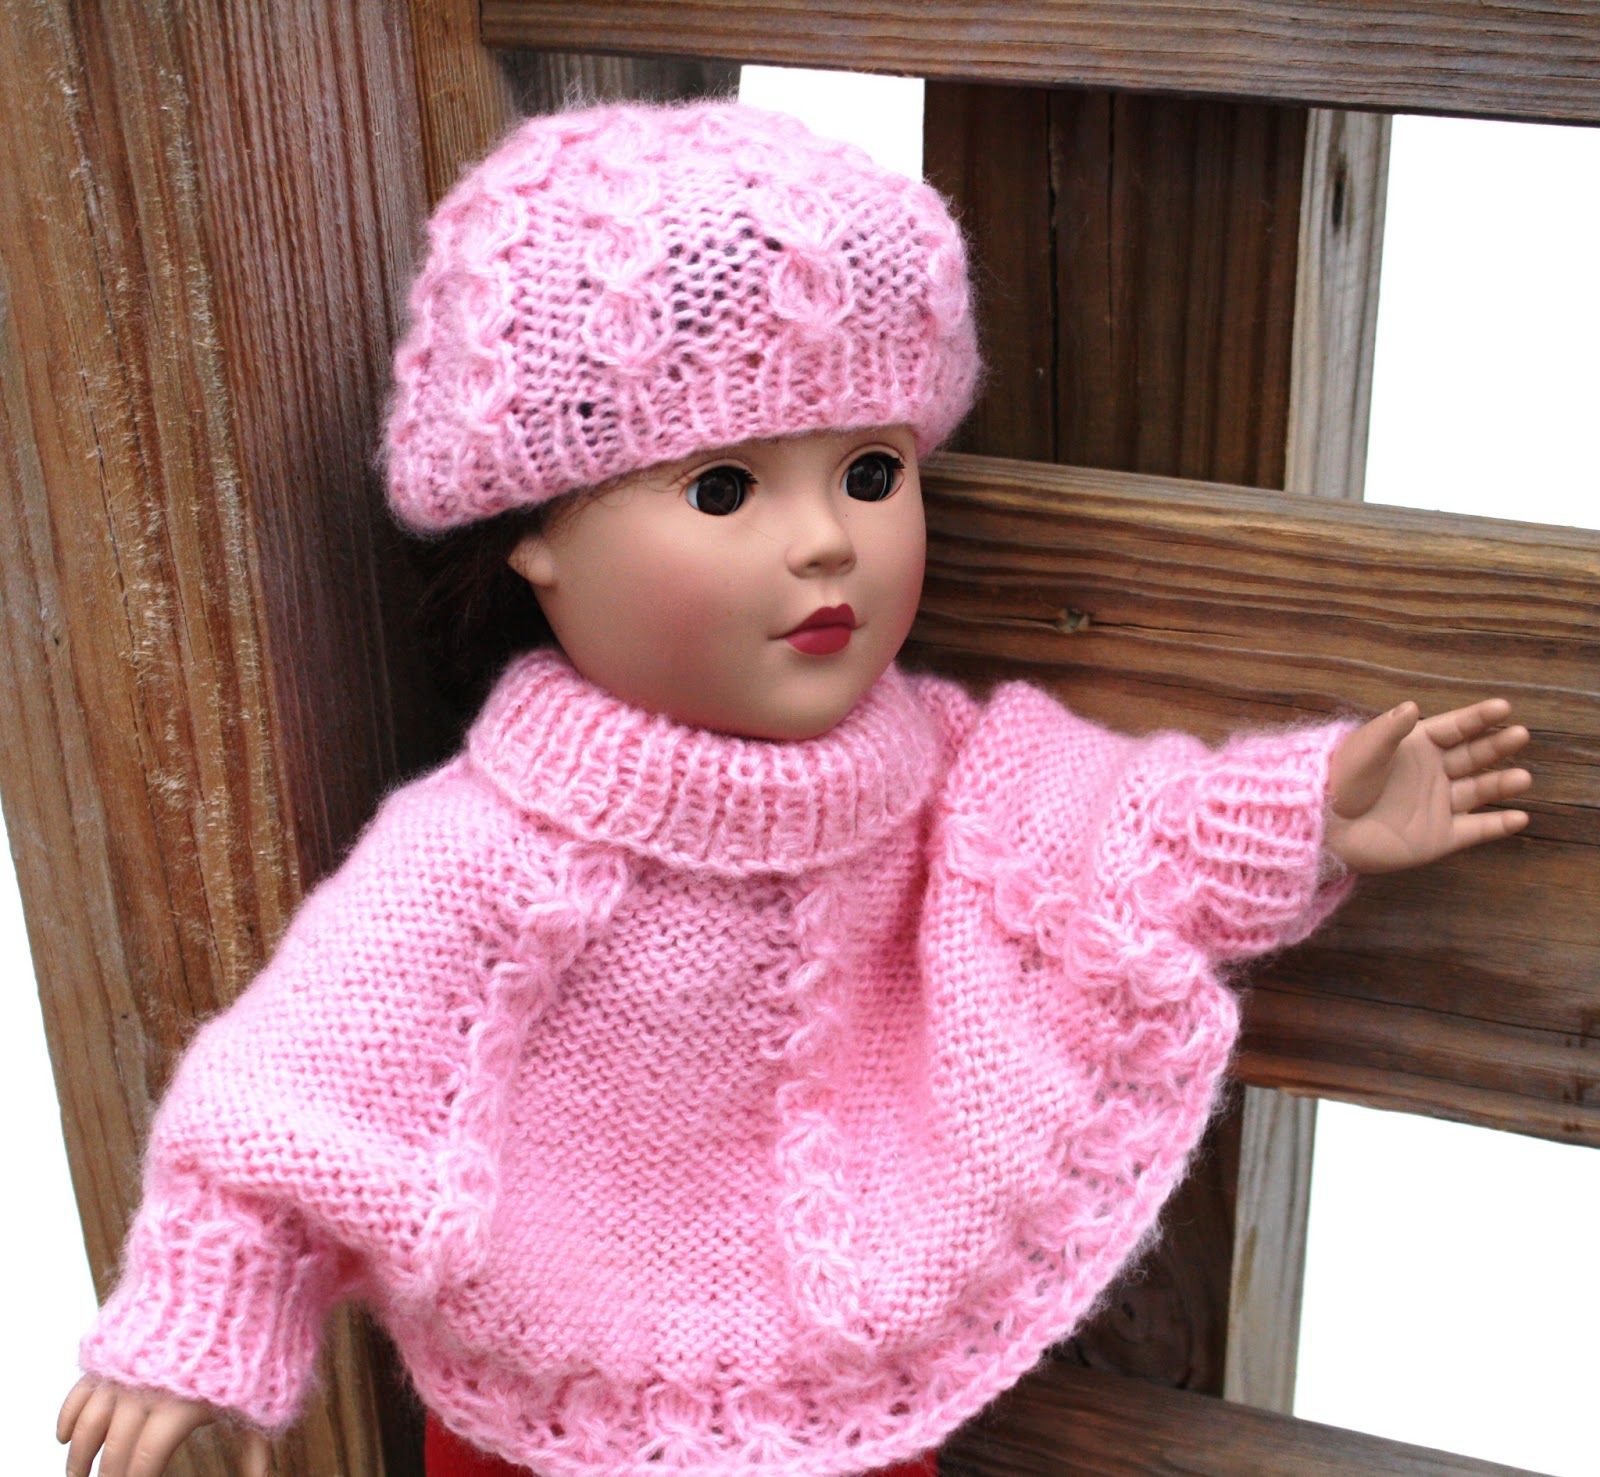 Free Knitting Patterns For Dolls Hats All Knitted Lace New Pattern Cable Sweater And Hat Set For 18 Doll